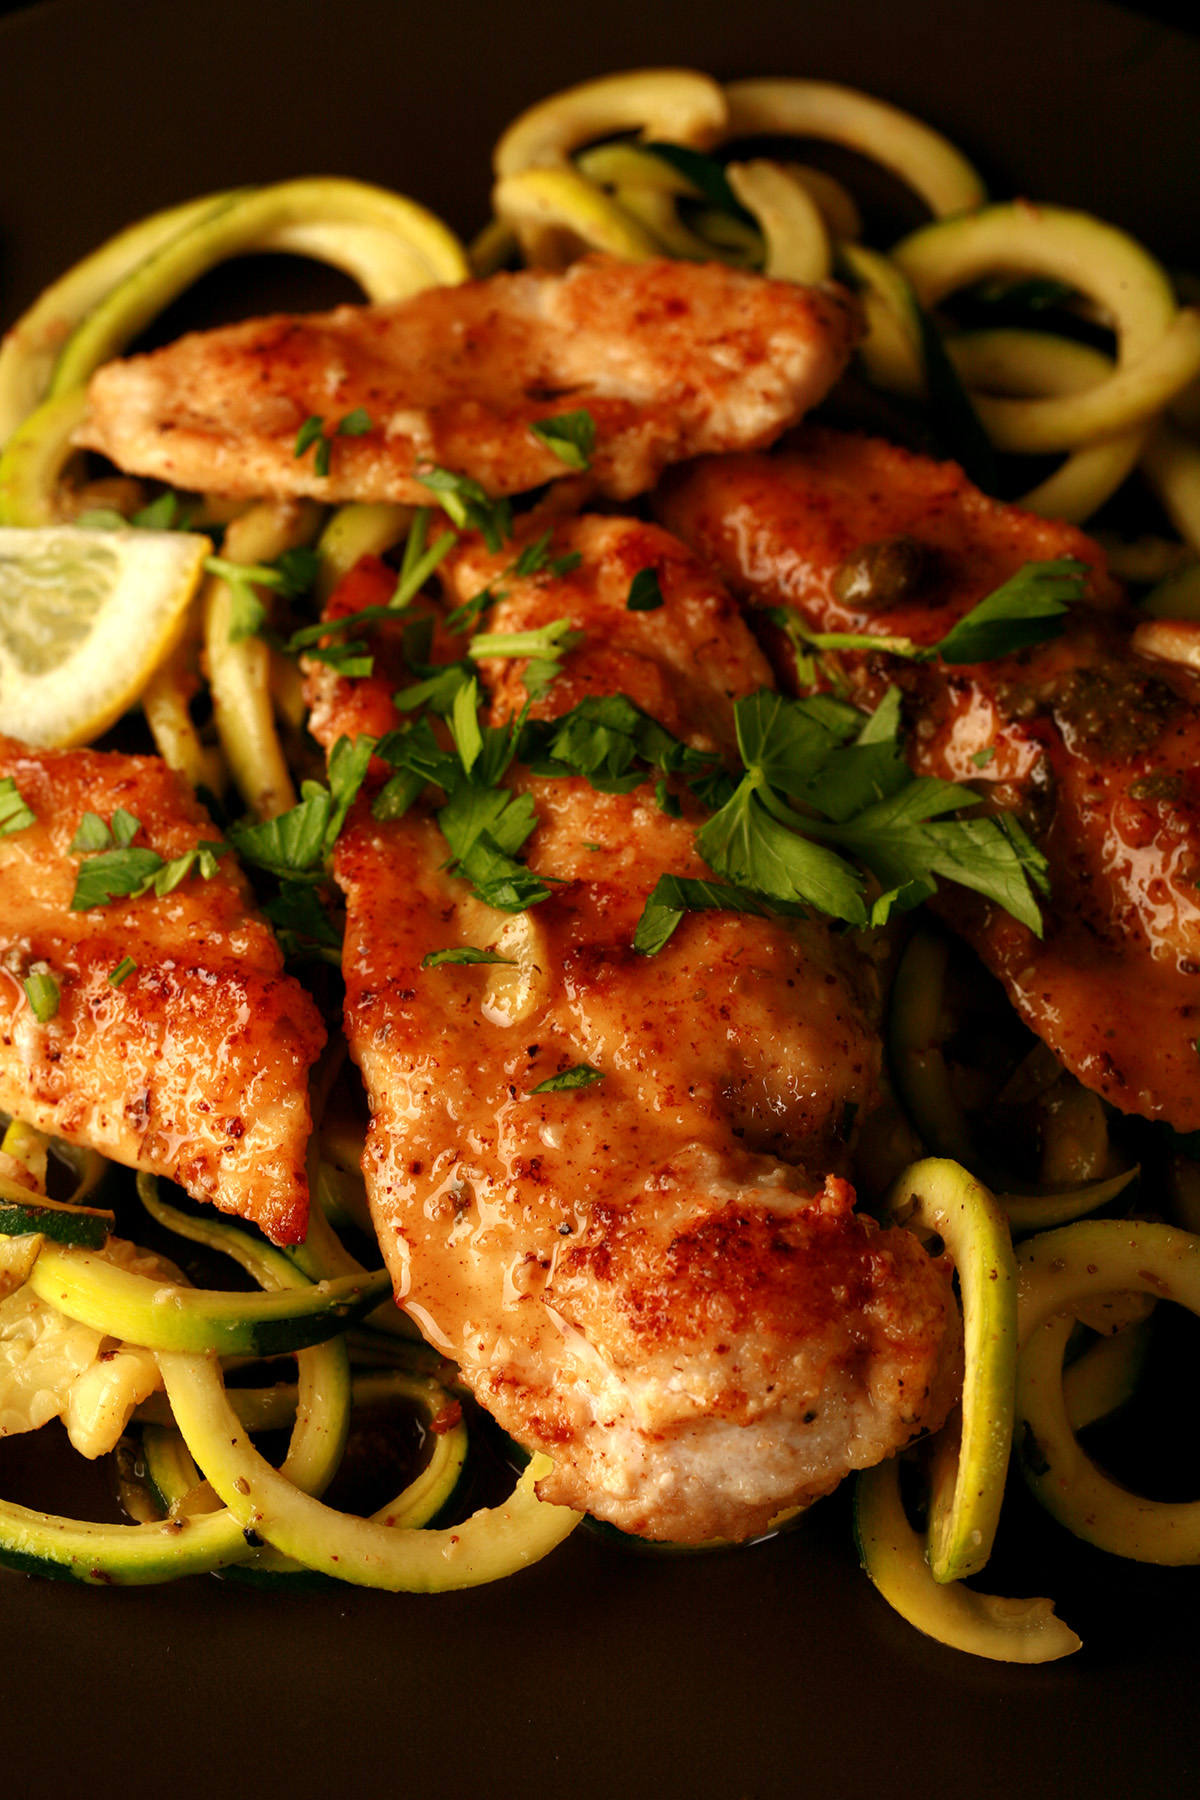 3 pieces of low carb chicken piccata, served on a bed of zoodles - zucchini noodles.